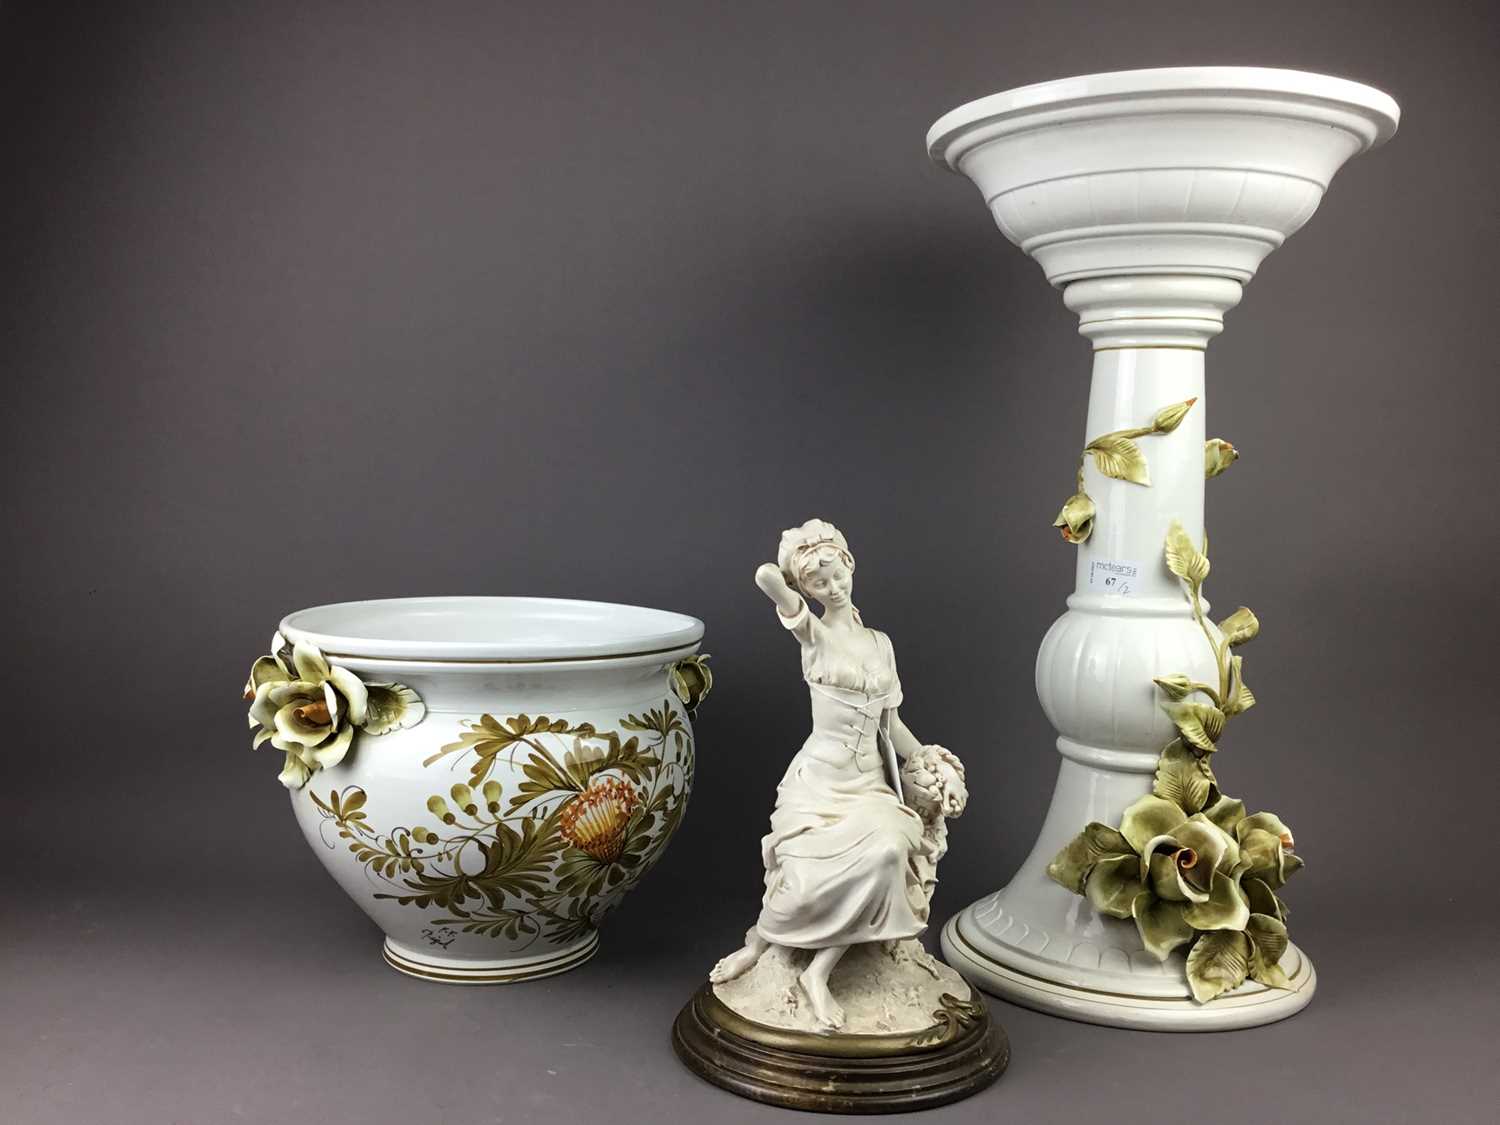 Lot 67 - A JARDINIERE AND A FIGURE